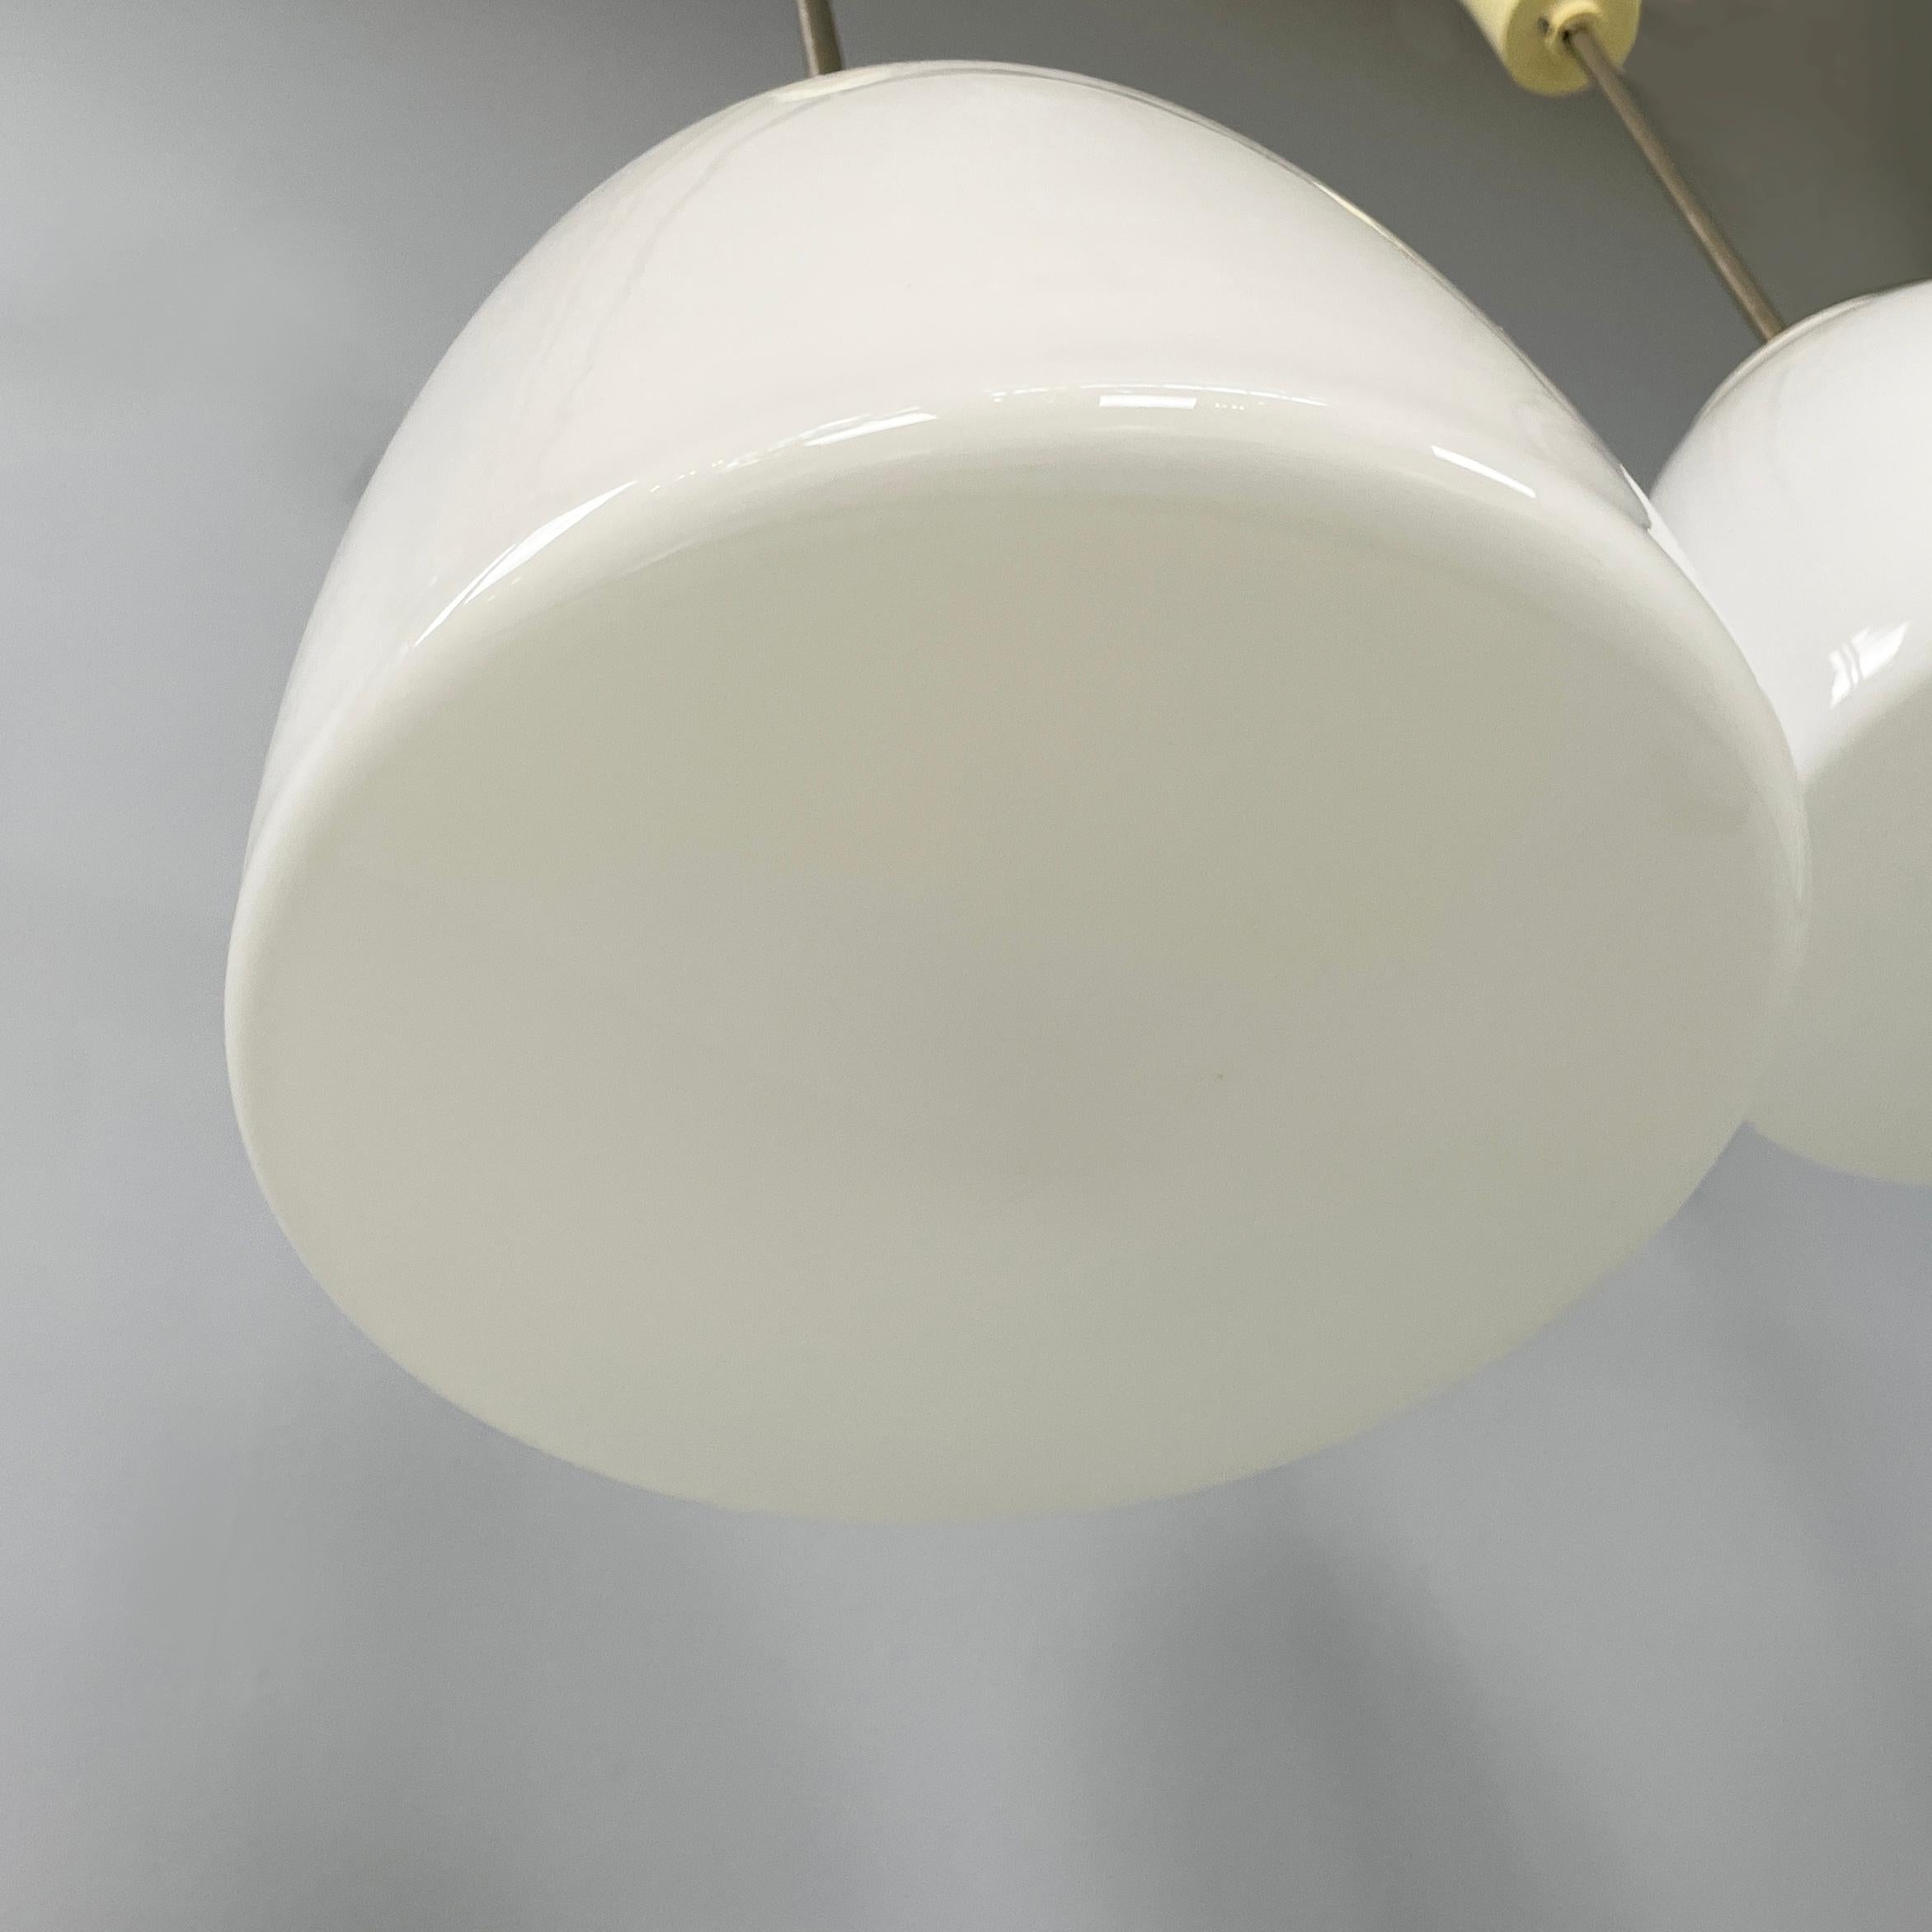 German Bauhaus Chandelier in opaline glass, white plastic and metal, 1920s For Sale 2